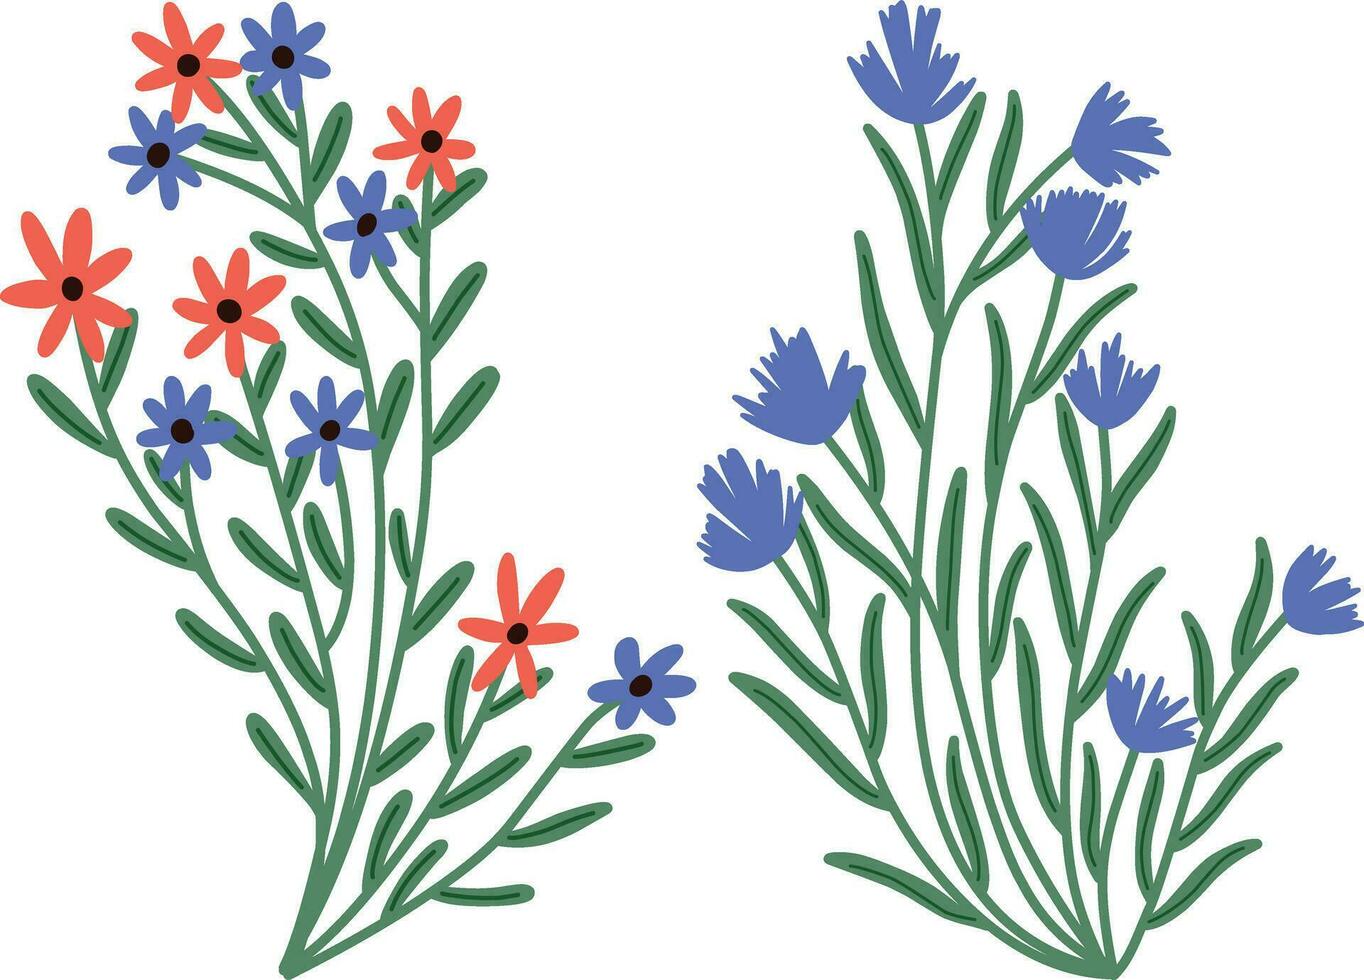 Hand drawn vector illustration of cornflowers isolated on white background.